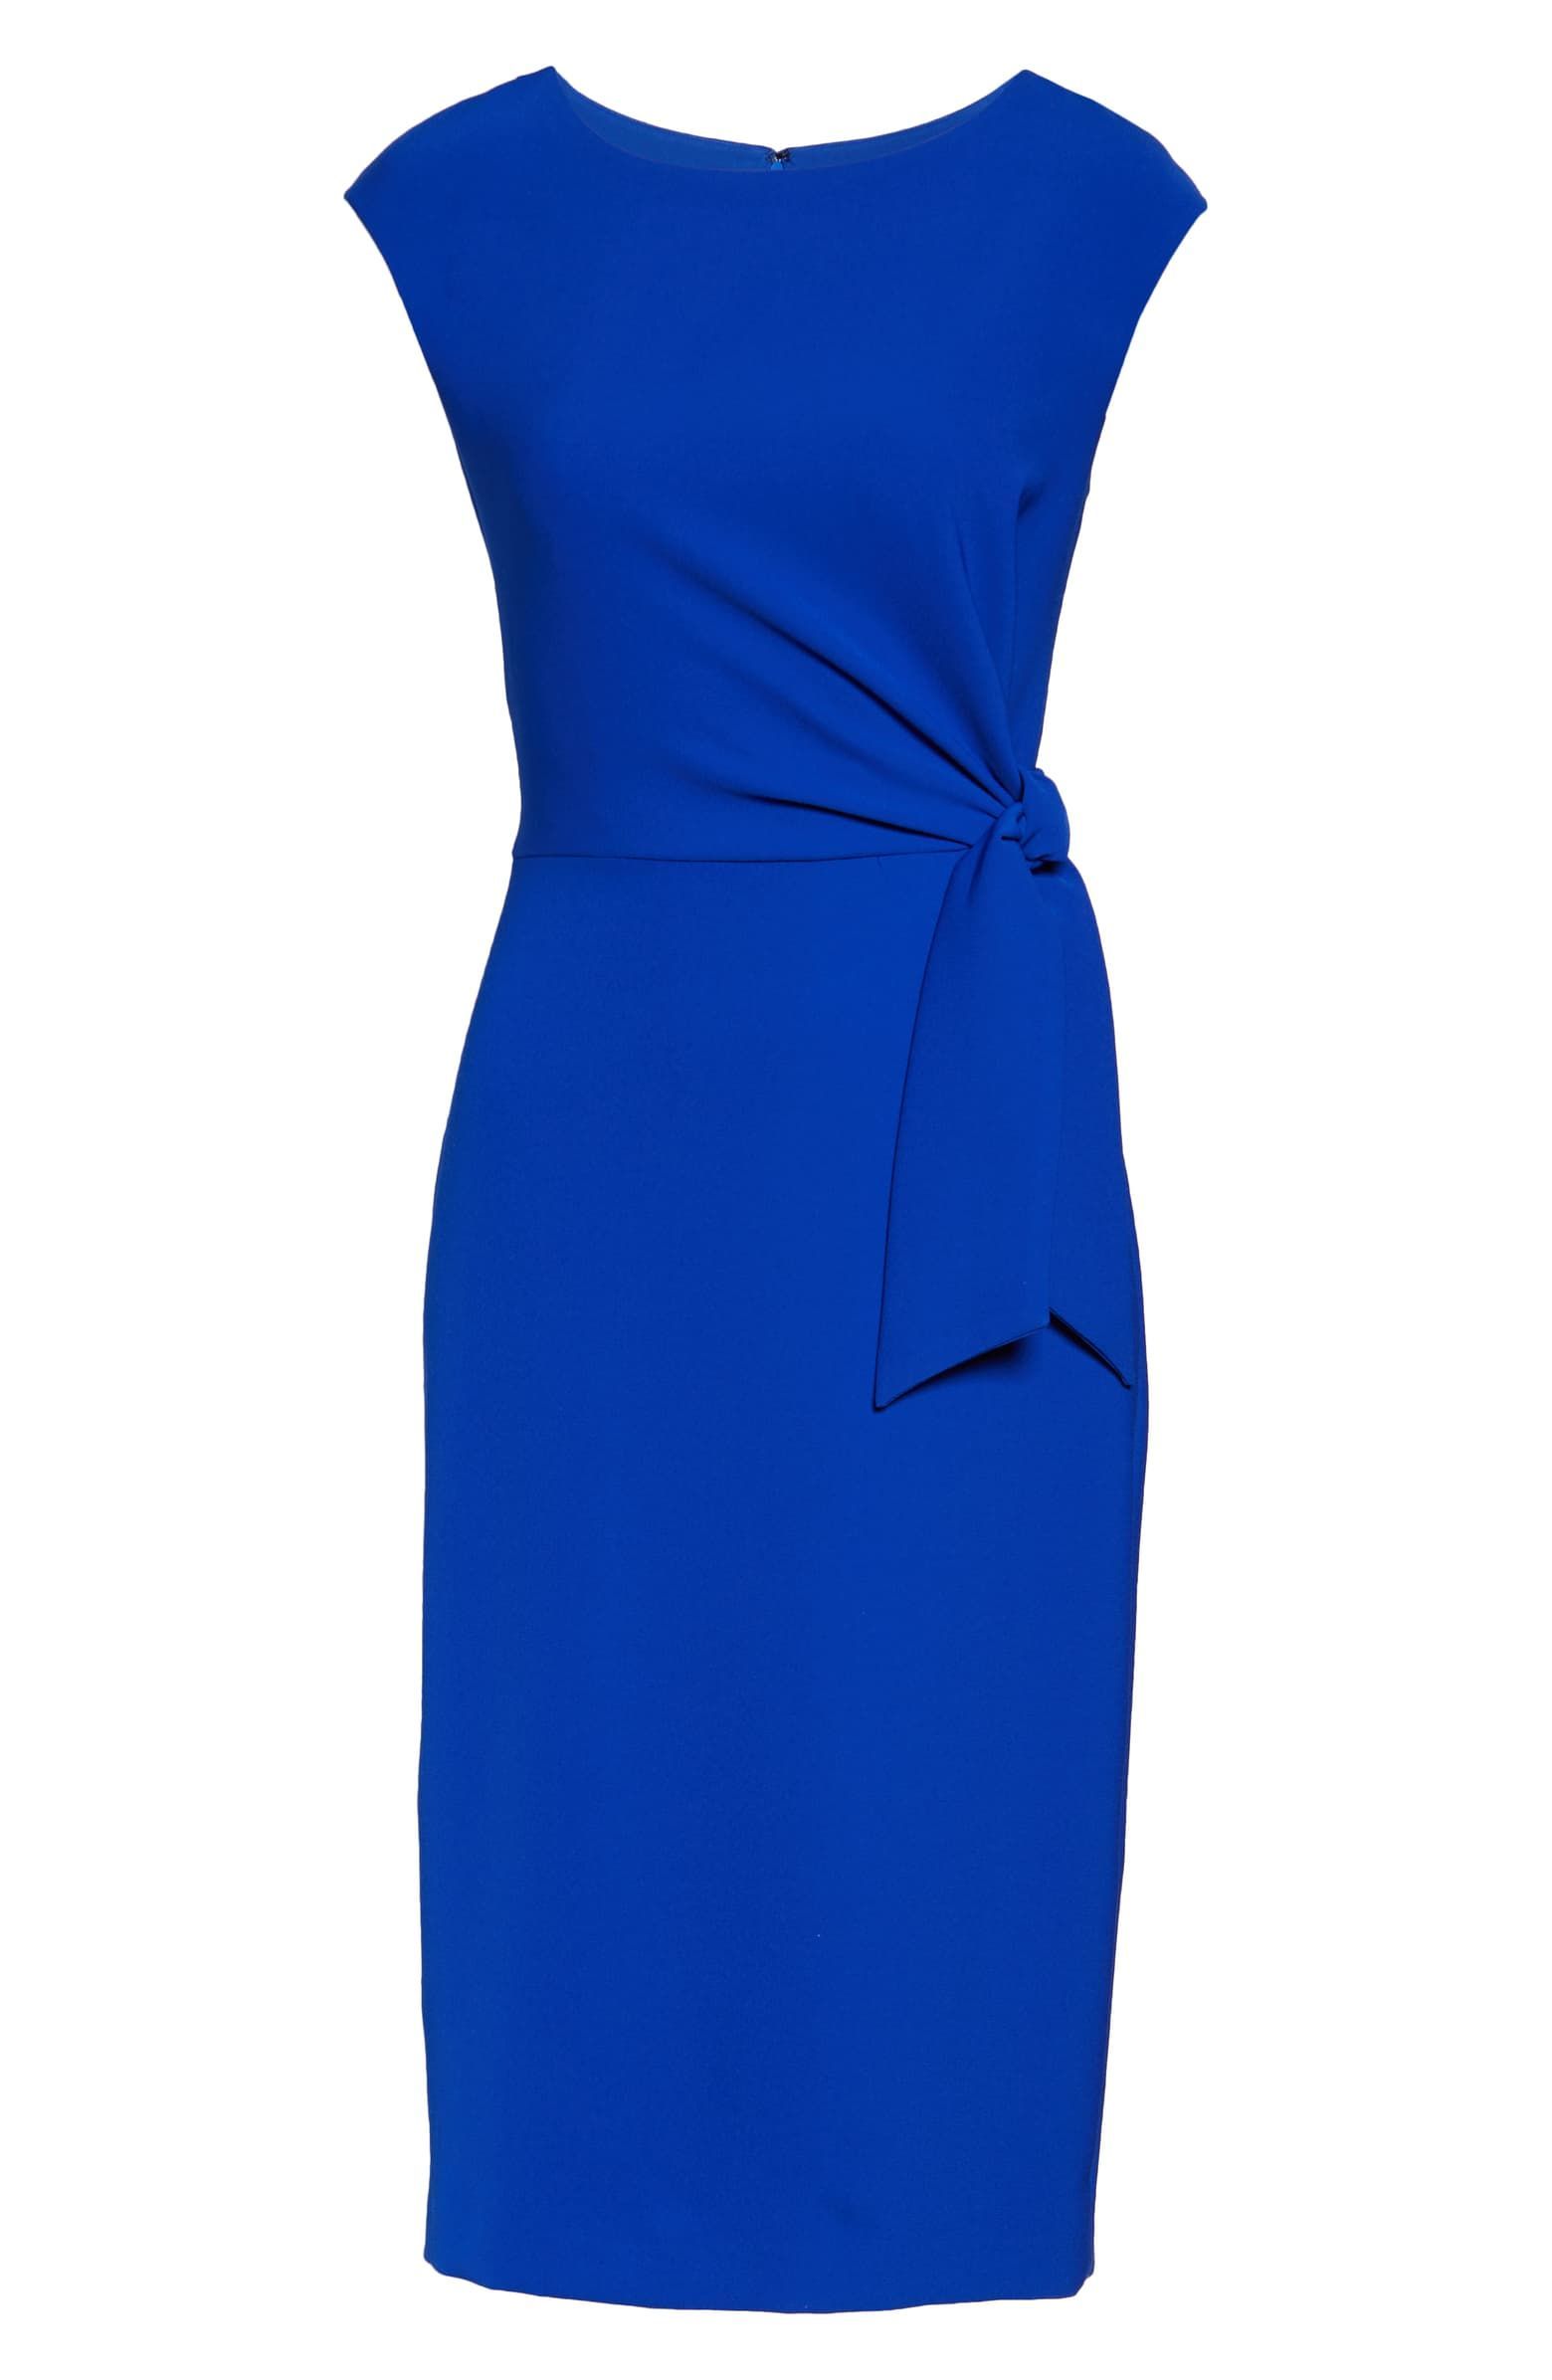 blue dresses to wear at a wedding